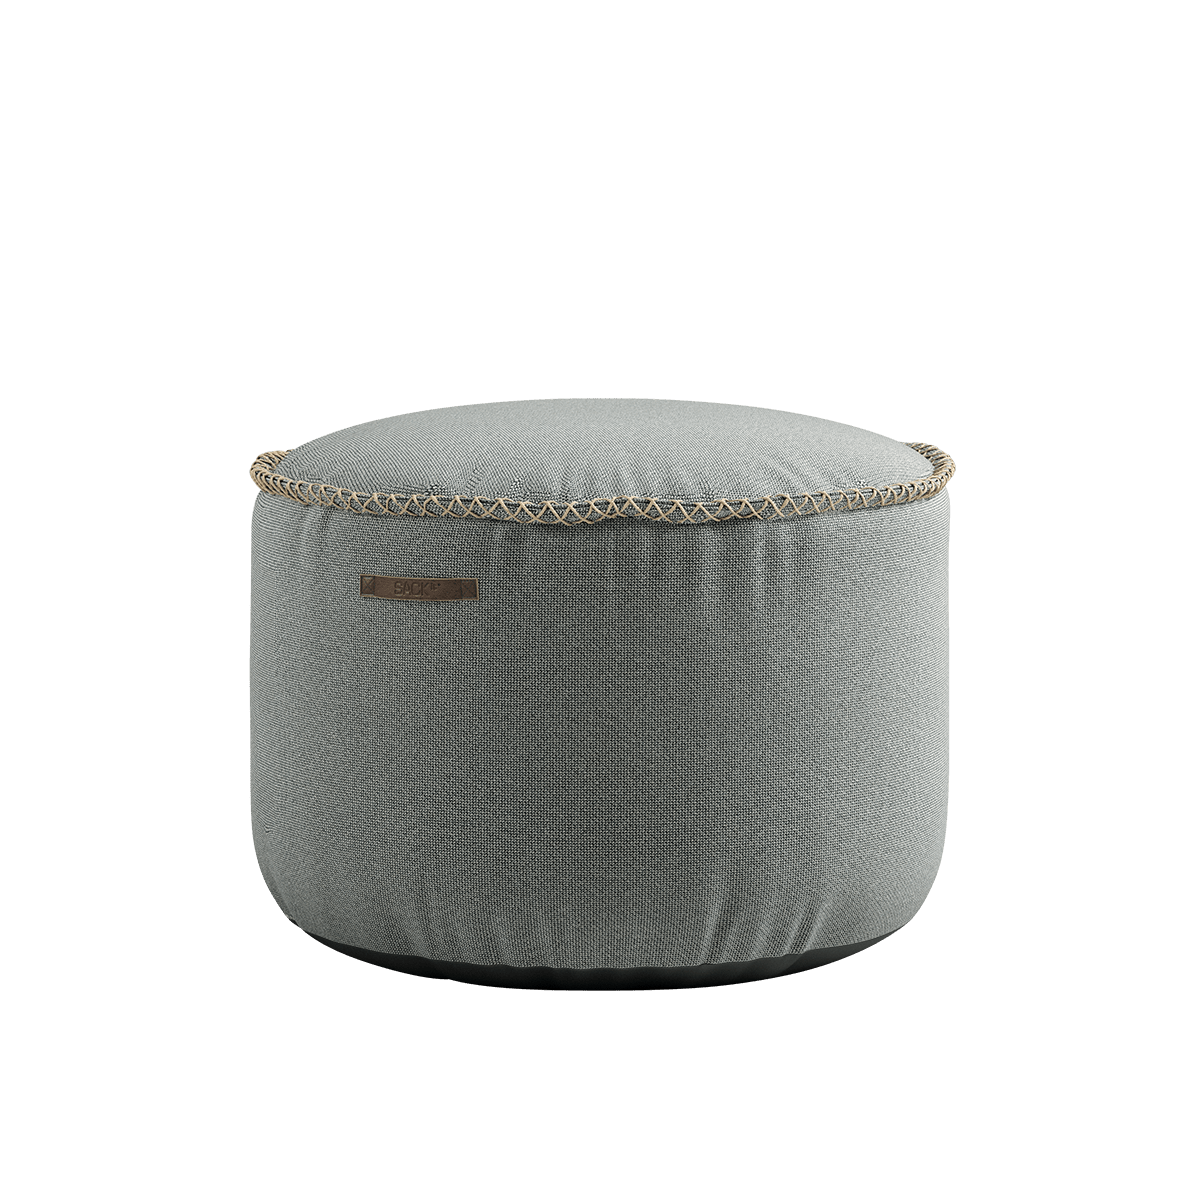 variant_8567154% | Cura Pouf [Contract] - Cura Grey | SACKit